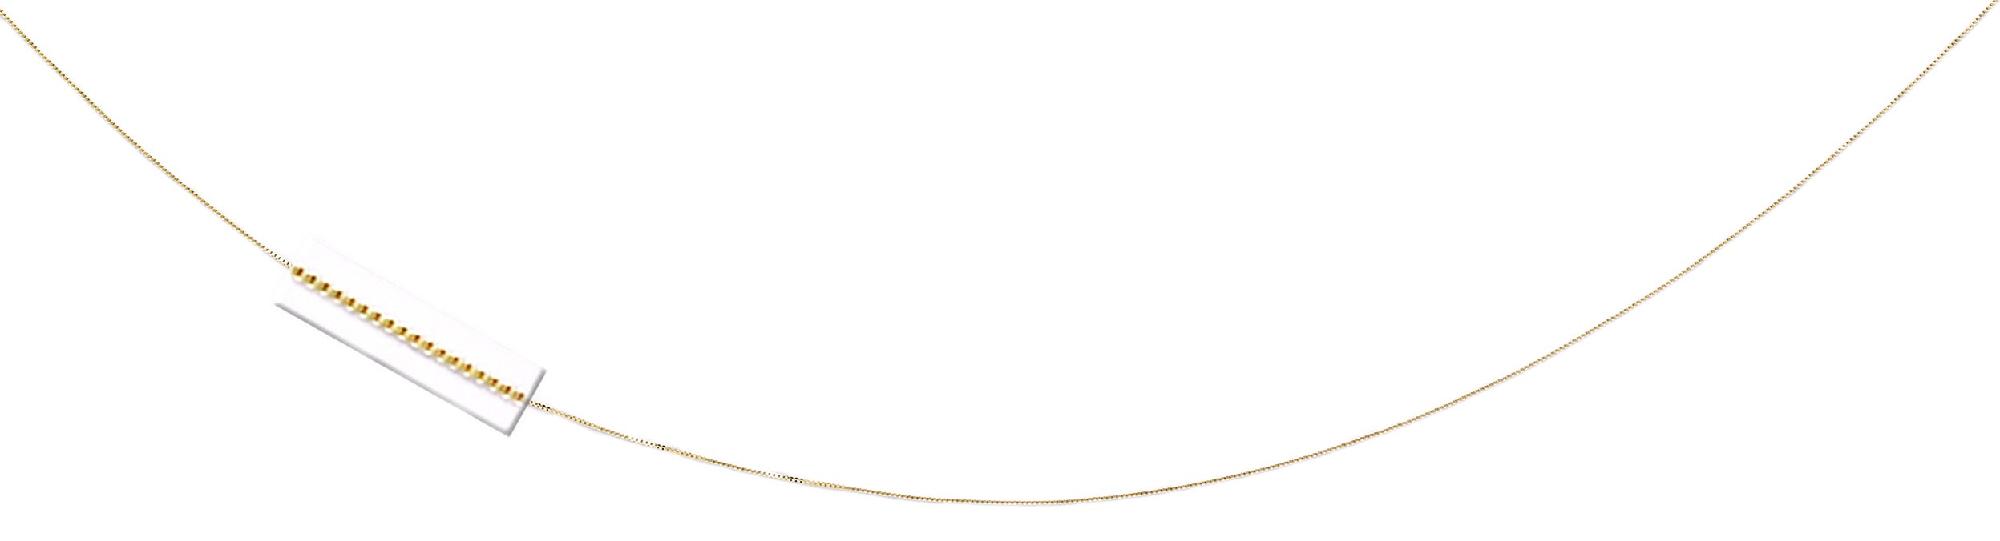 14k Yellow Gold Box Chain Pendant Necklace - 15 Inch